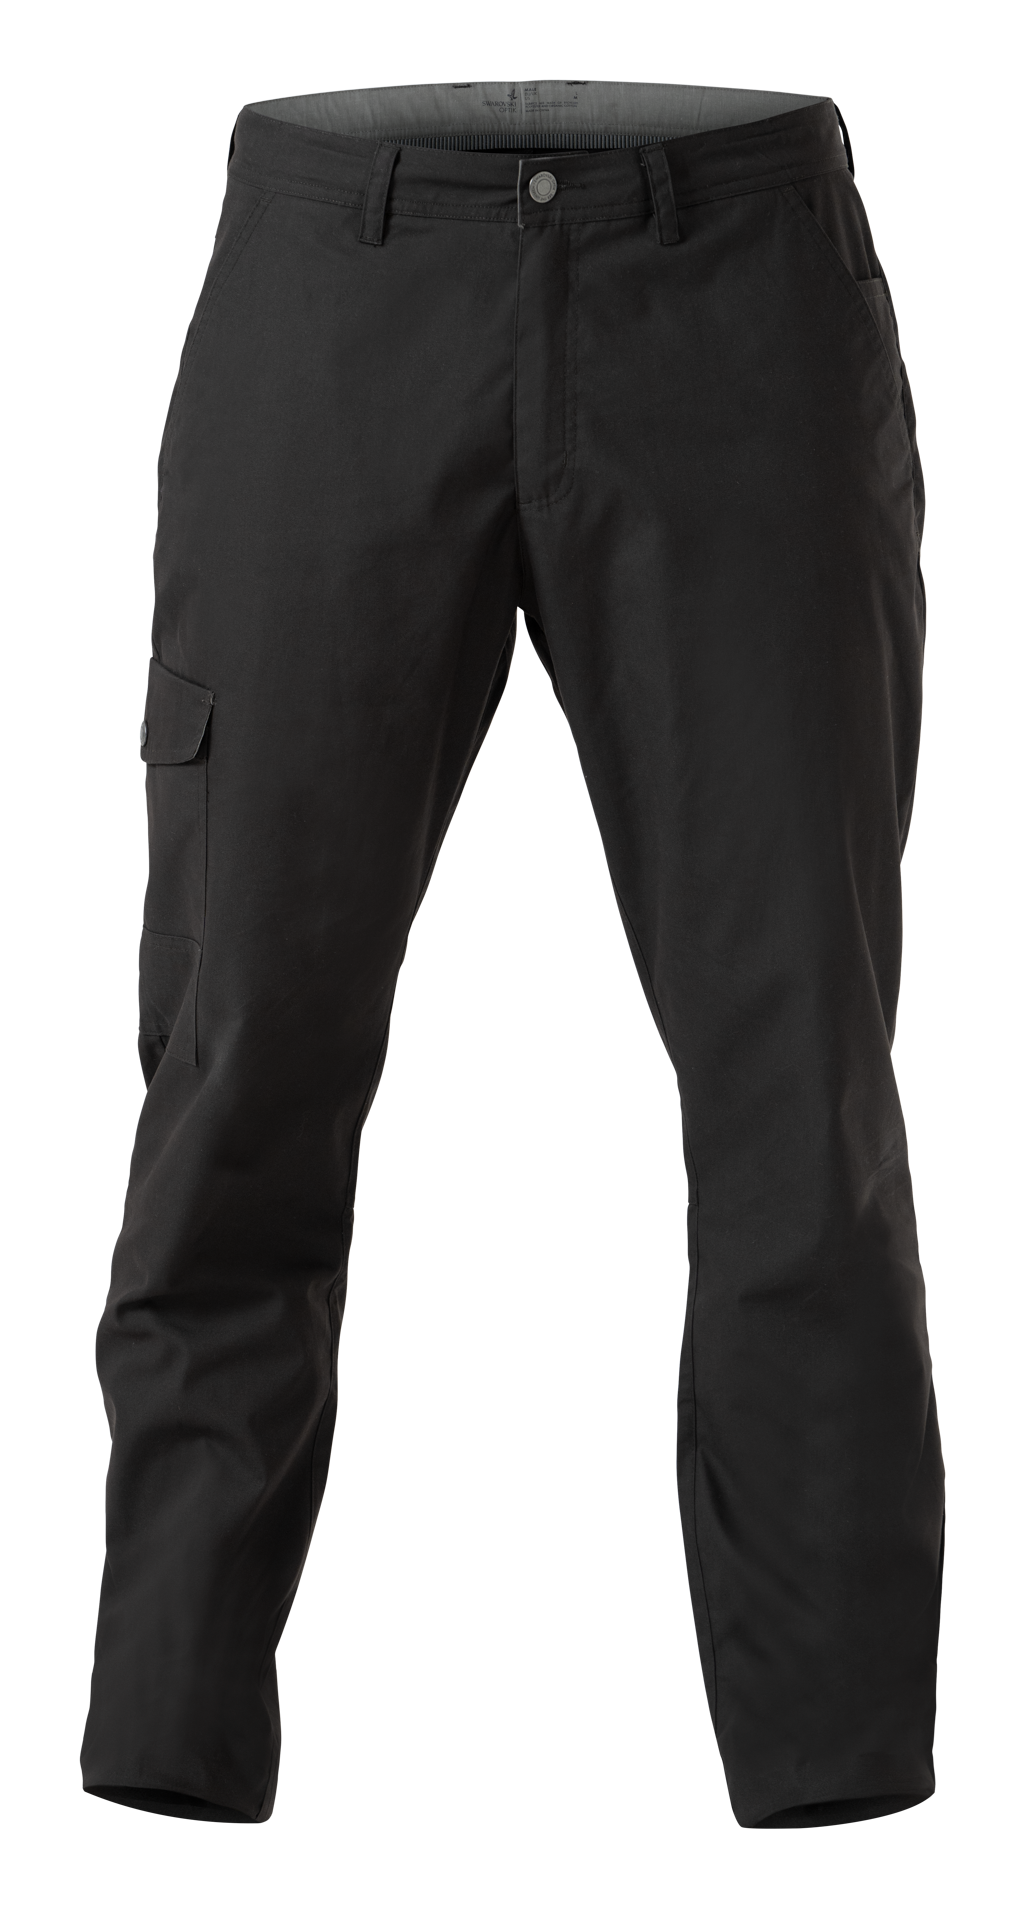 https://images.ctfassets.net/pvkenuwtinkd/1BXAFWqnKwVVY3DAgRiTuW/5a24ae599a104dfe4d745097c0ffb8c8/K21_OP_Outdoor_Pants_m_front_DSC1834_RGB_small.png